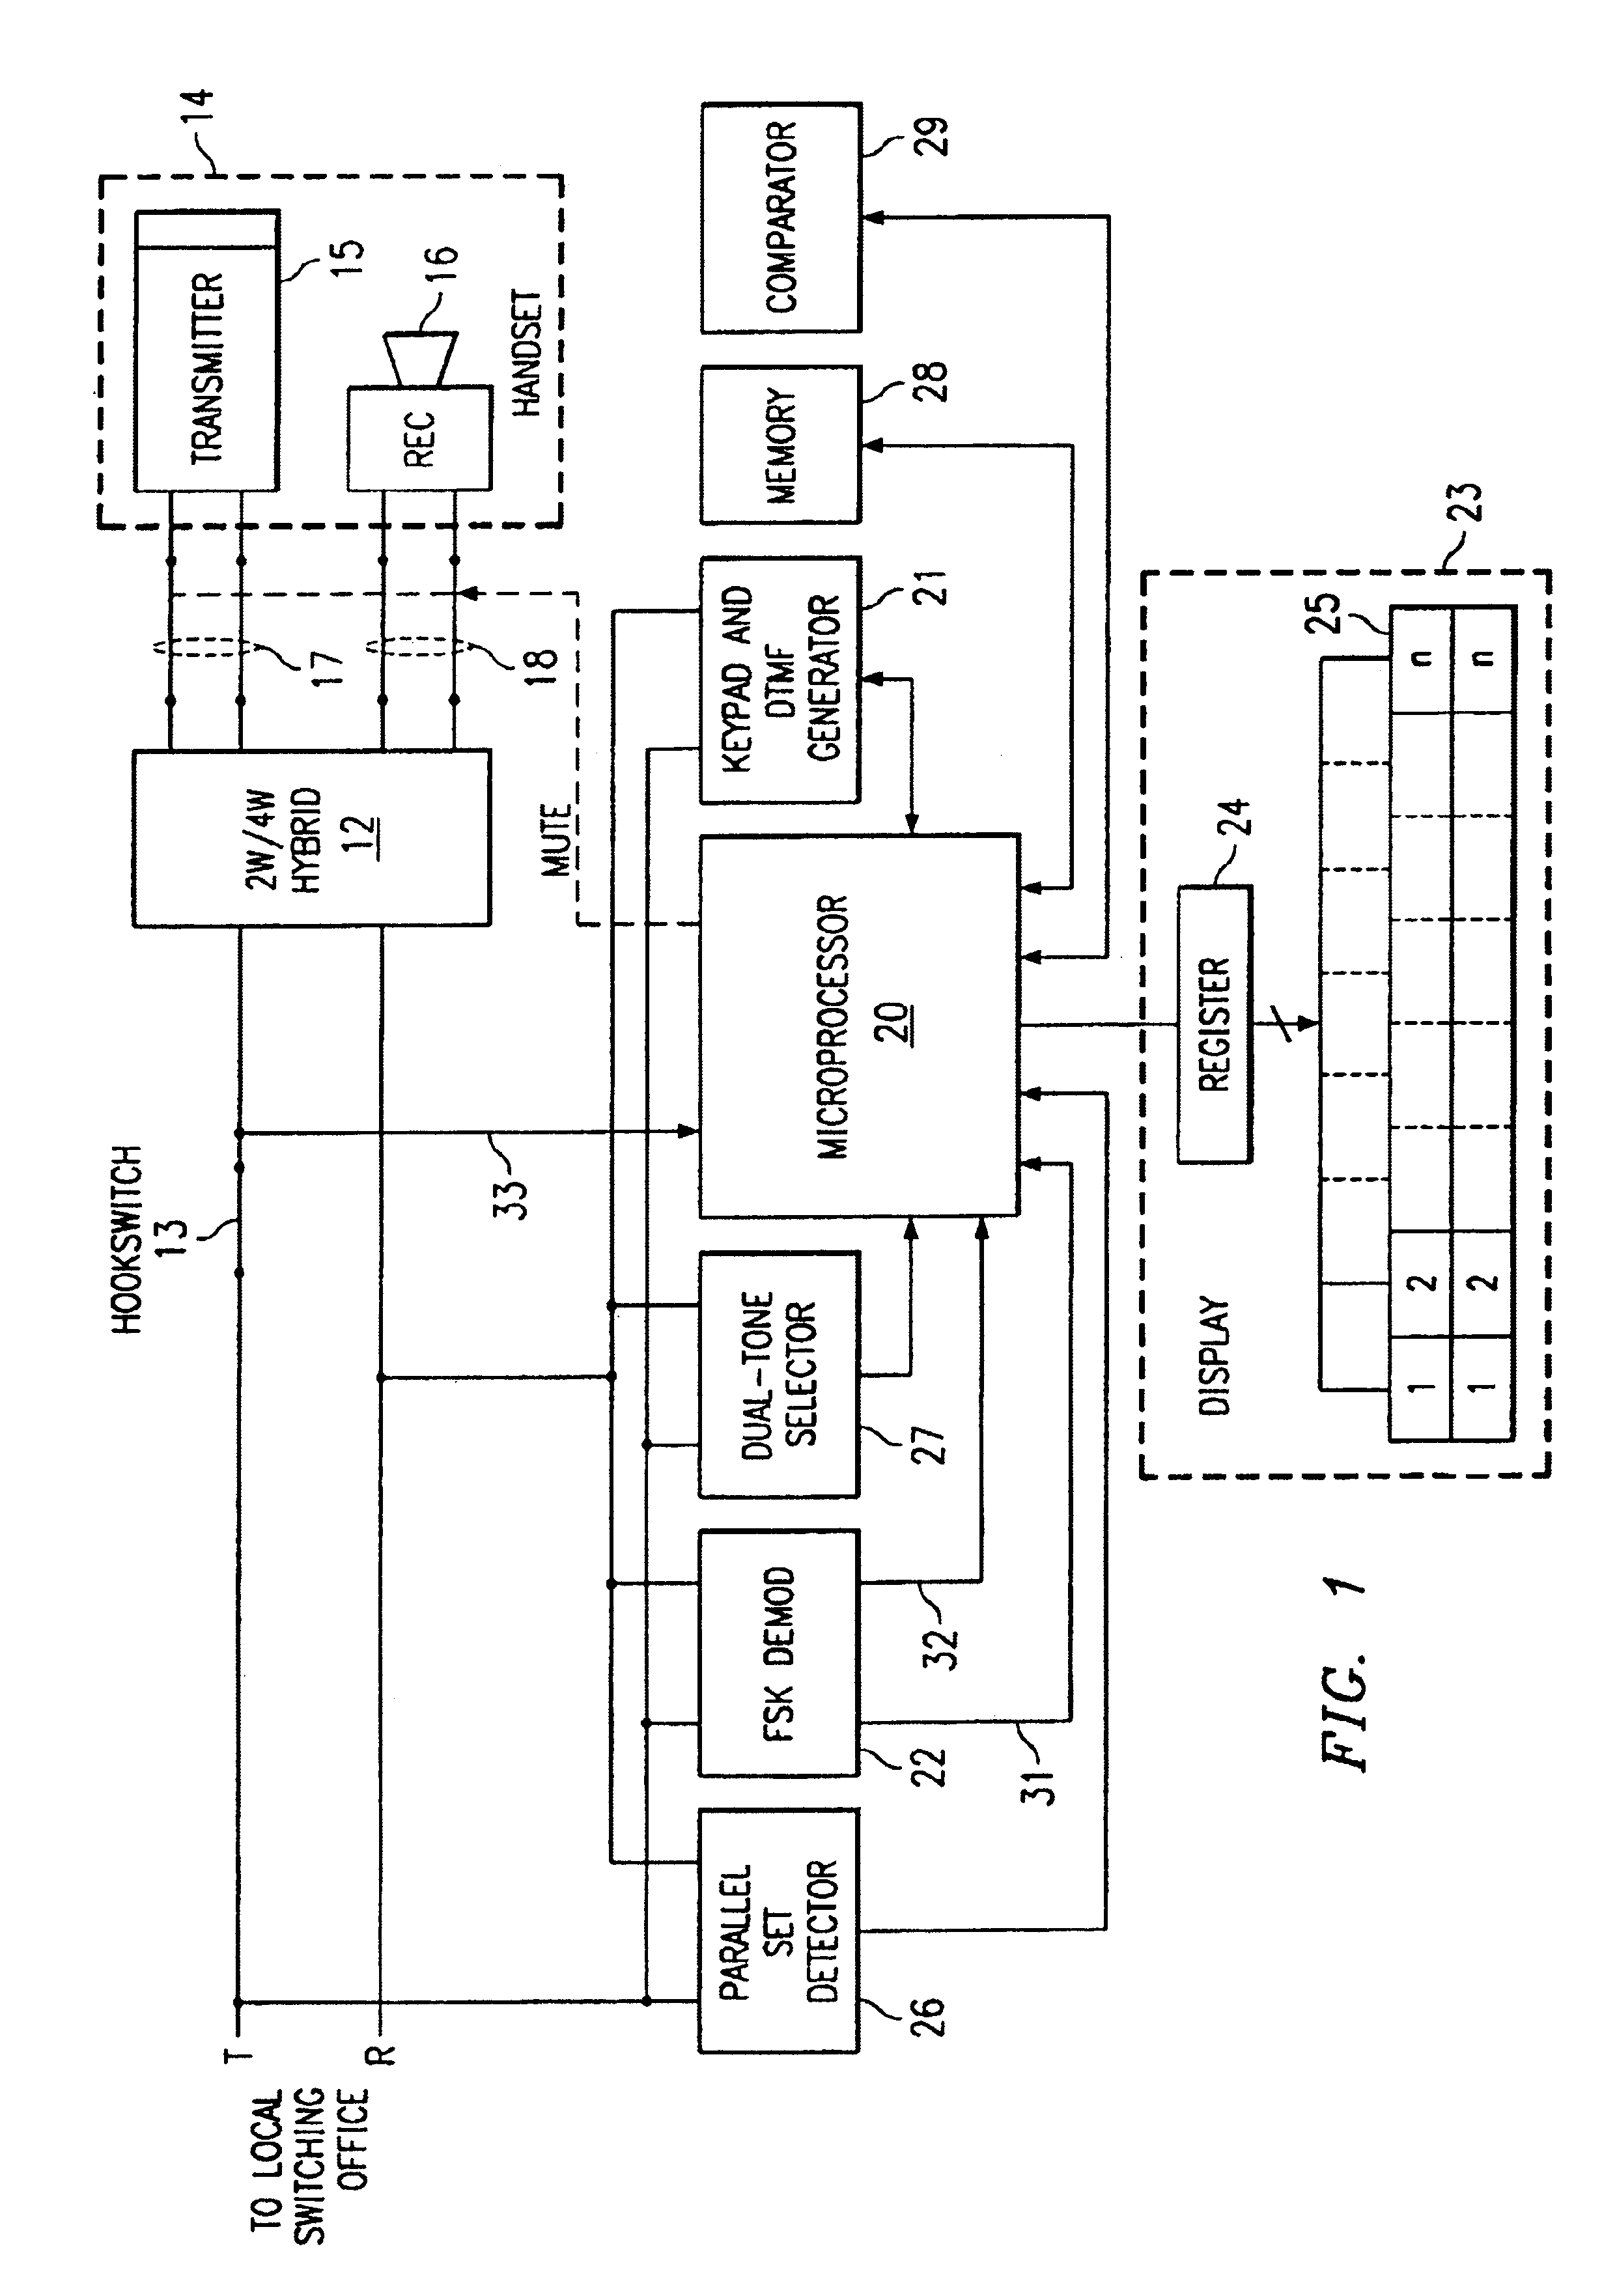 Enhanced call-waiting with caller identification method and apparatus using notch filters